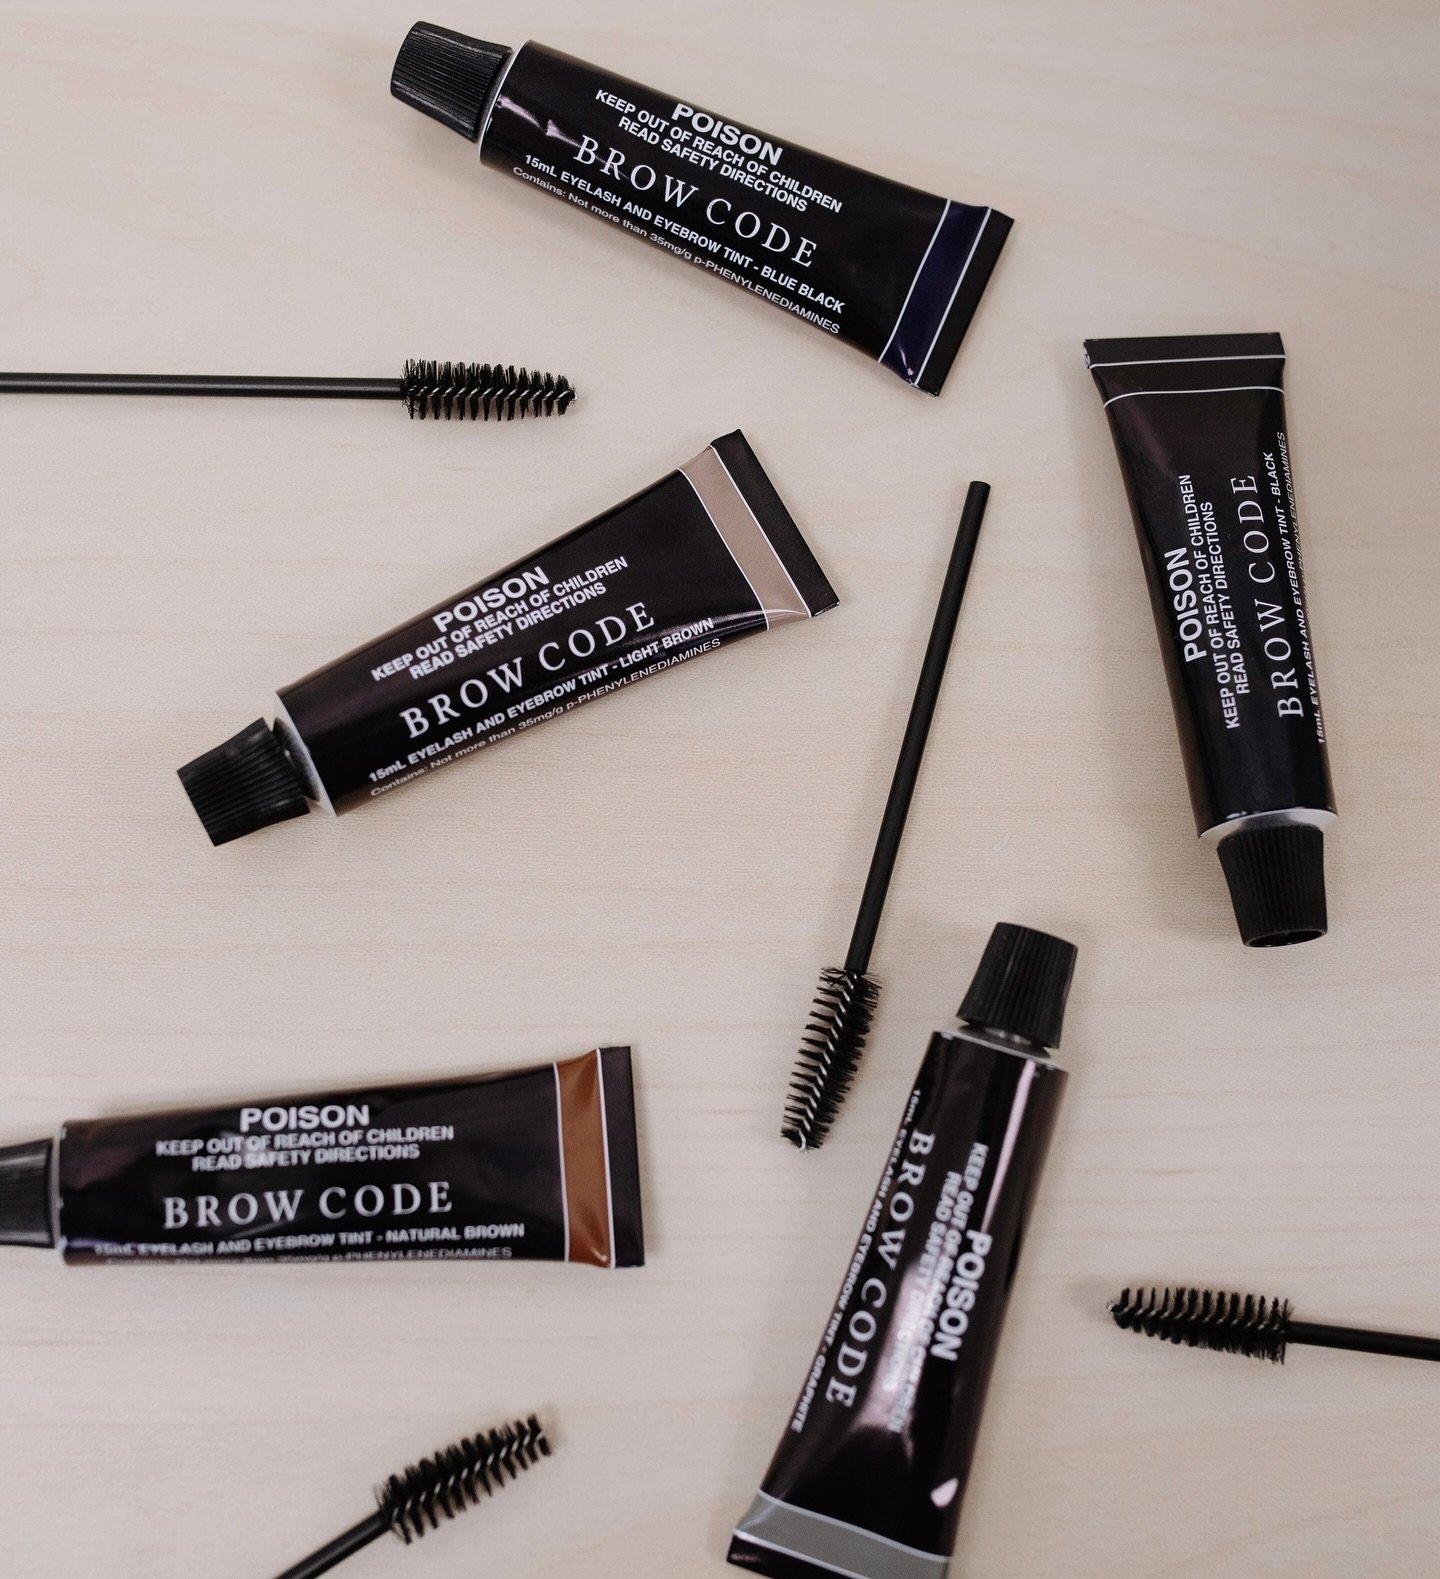 Brow tint with one of our favorite brands ✨